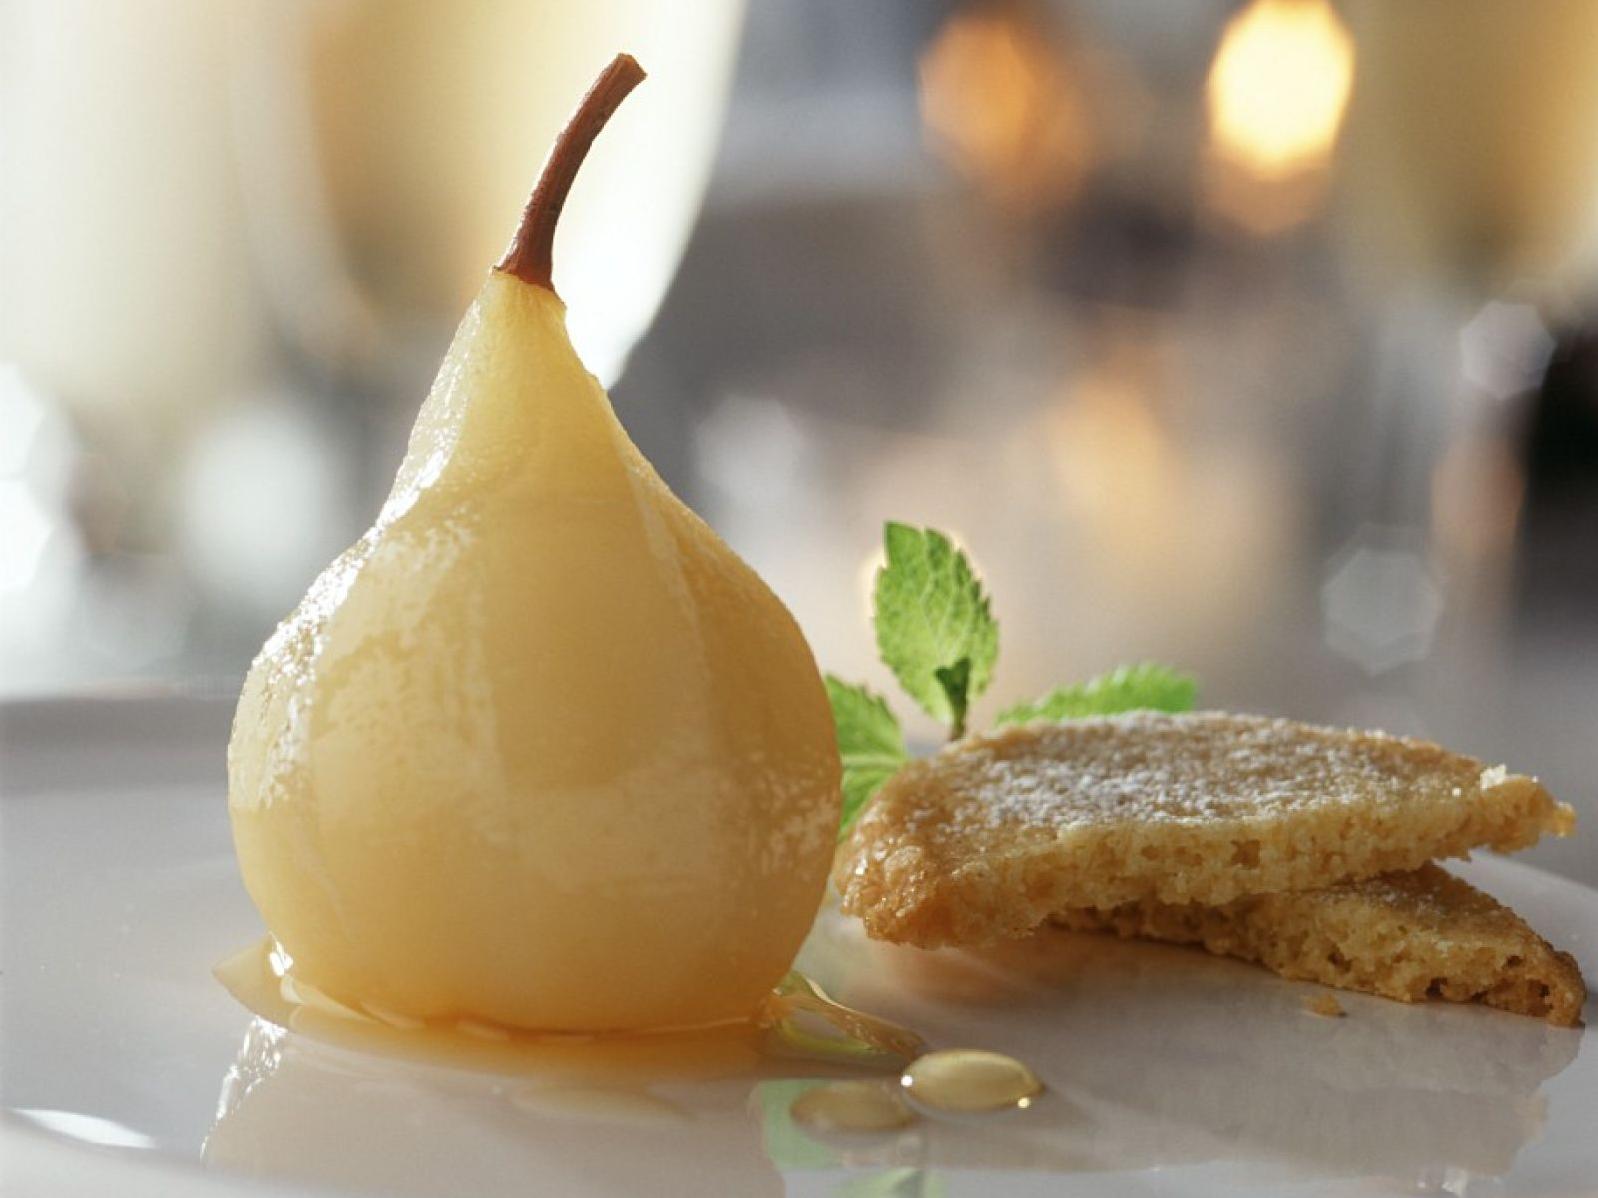  Infuse your pears with the aromatic and crisp flavors of white wine